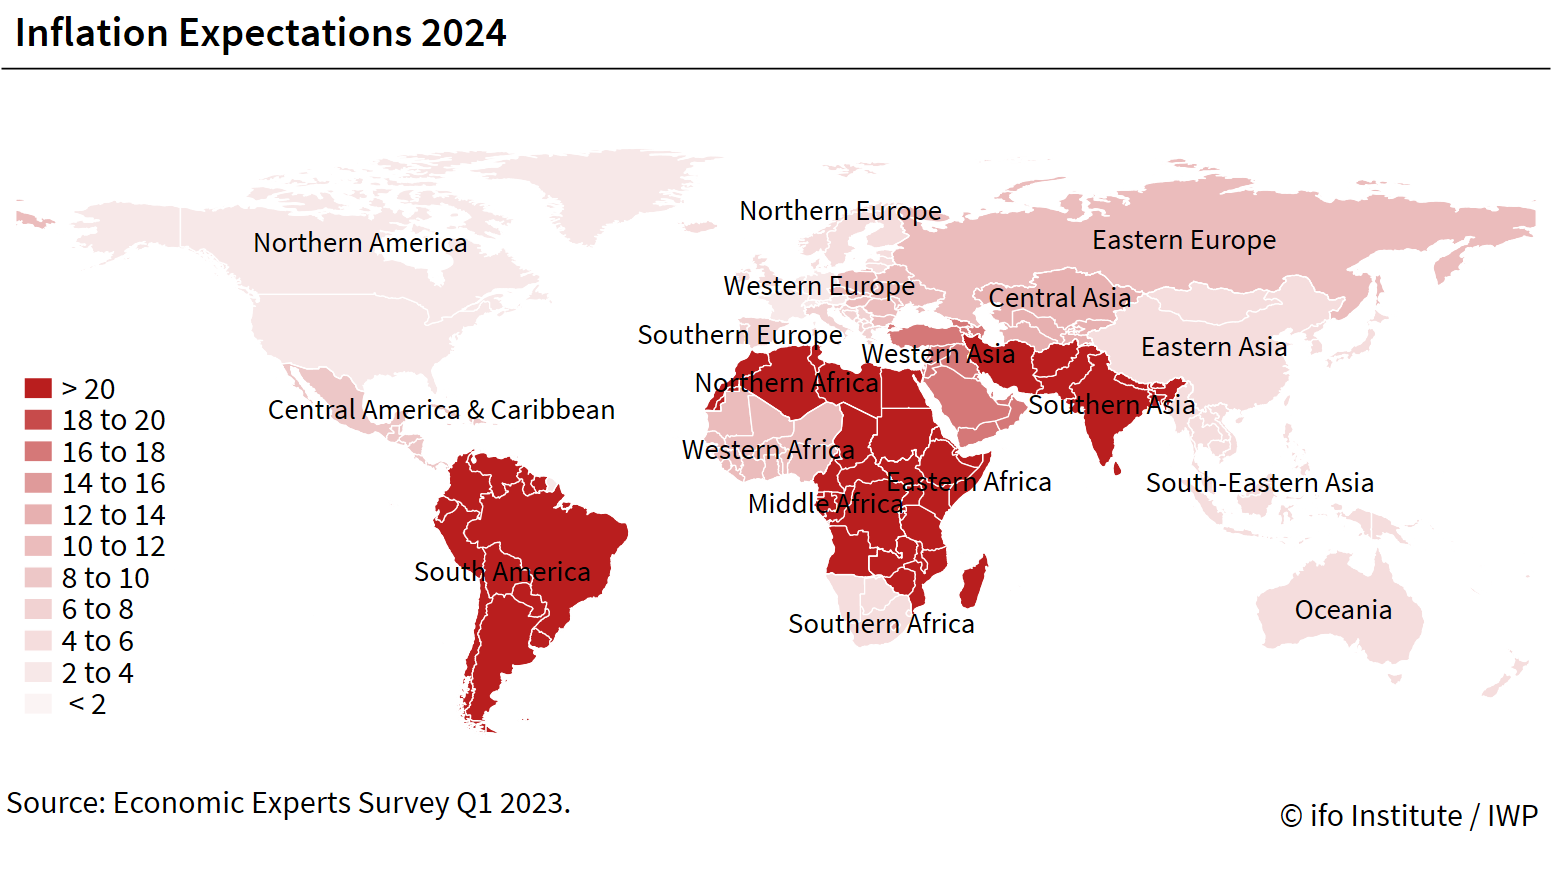 Economic Experts Survey Inflation Remains High Worldwide (Q1 2023